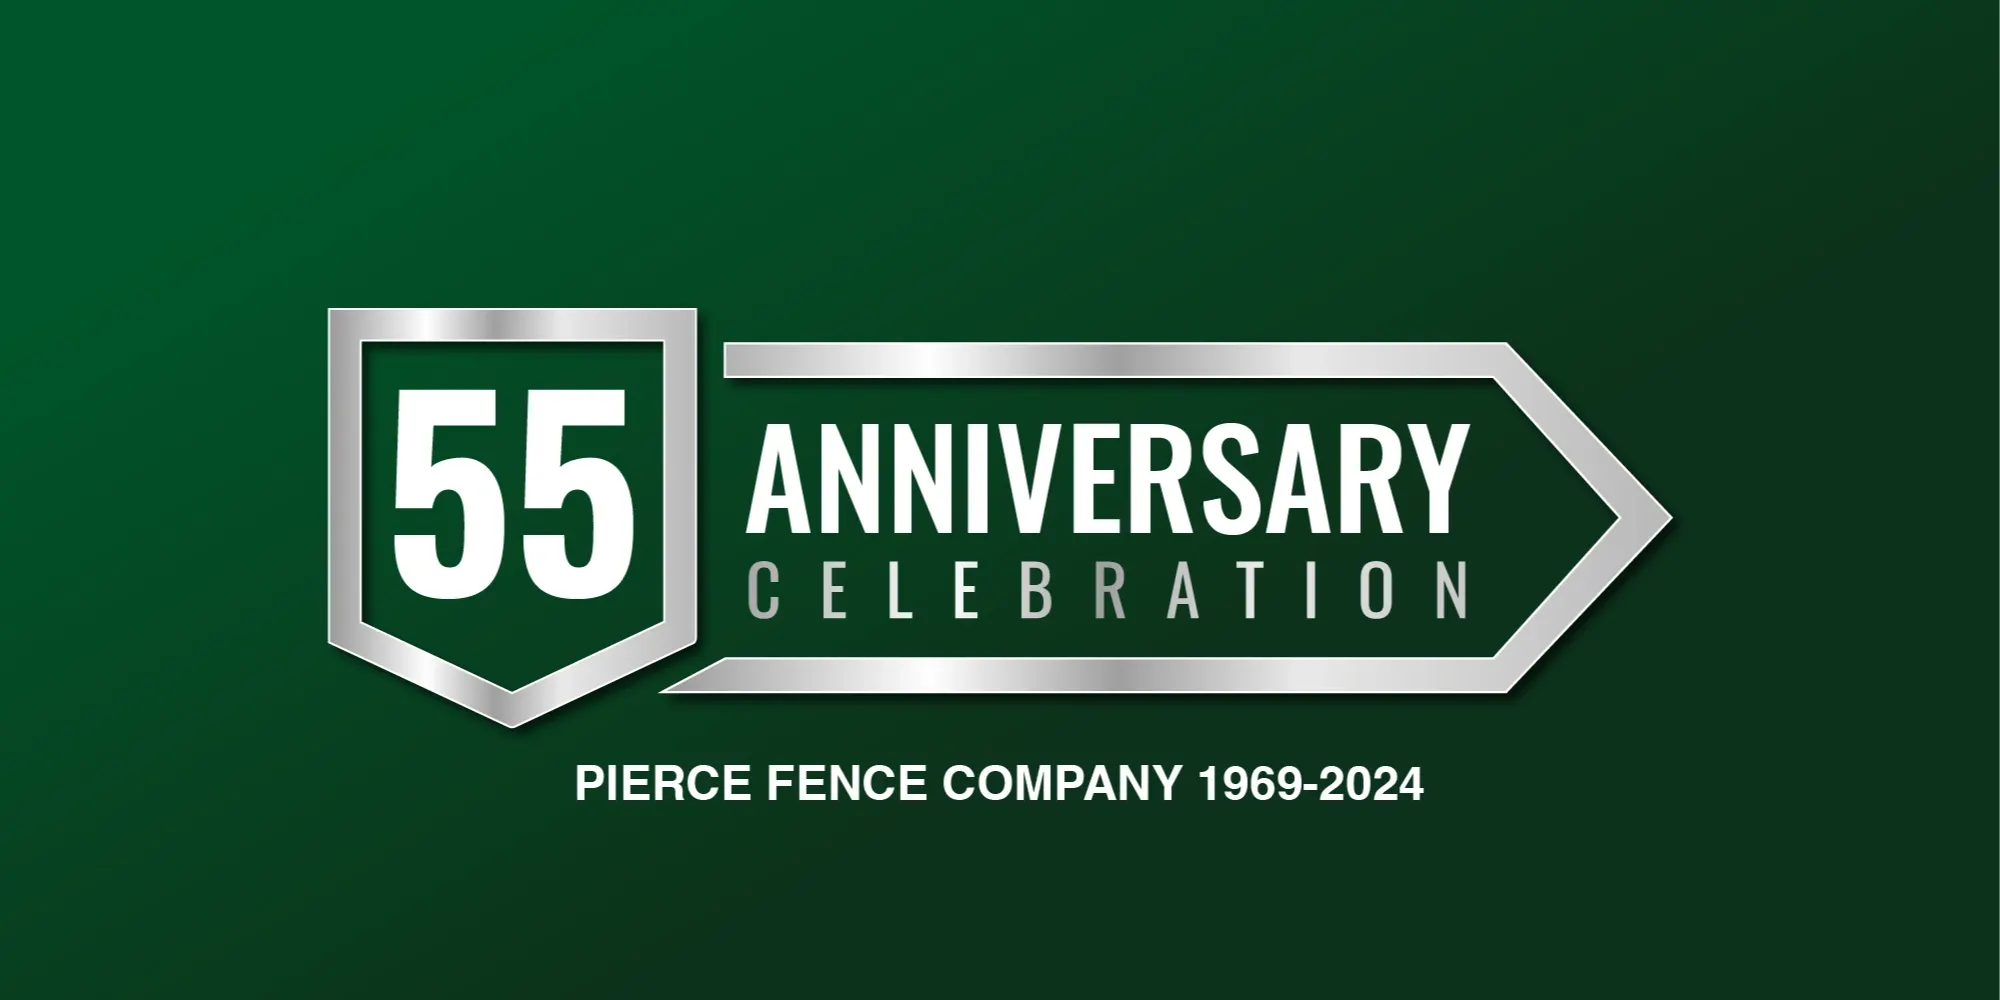 551_pierce-fence-55-banner Your local Fence Installer in Delaware.